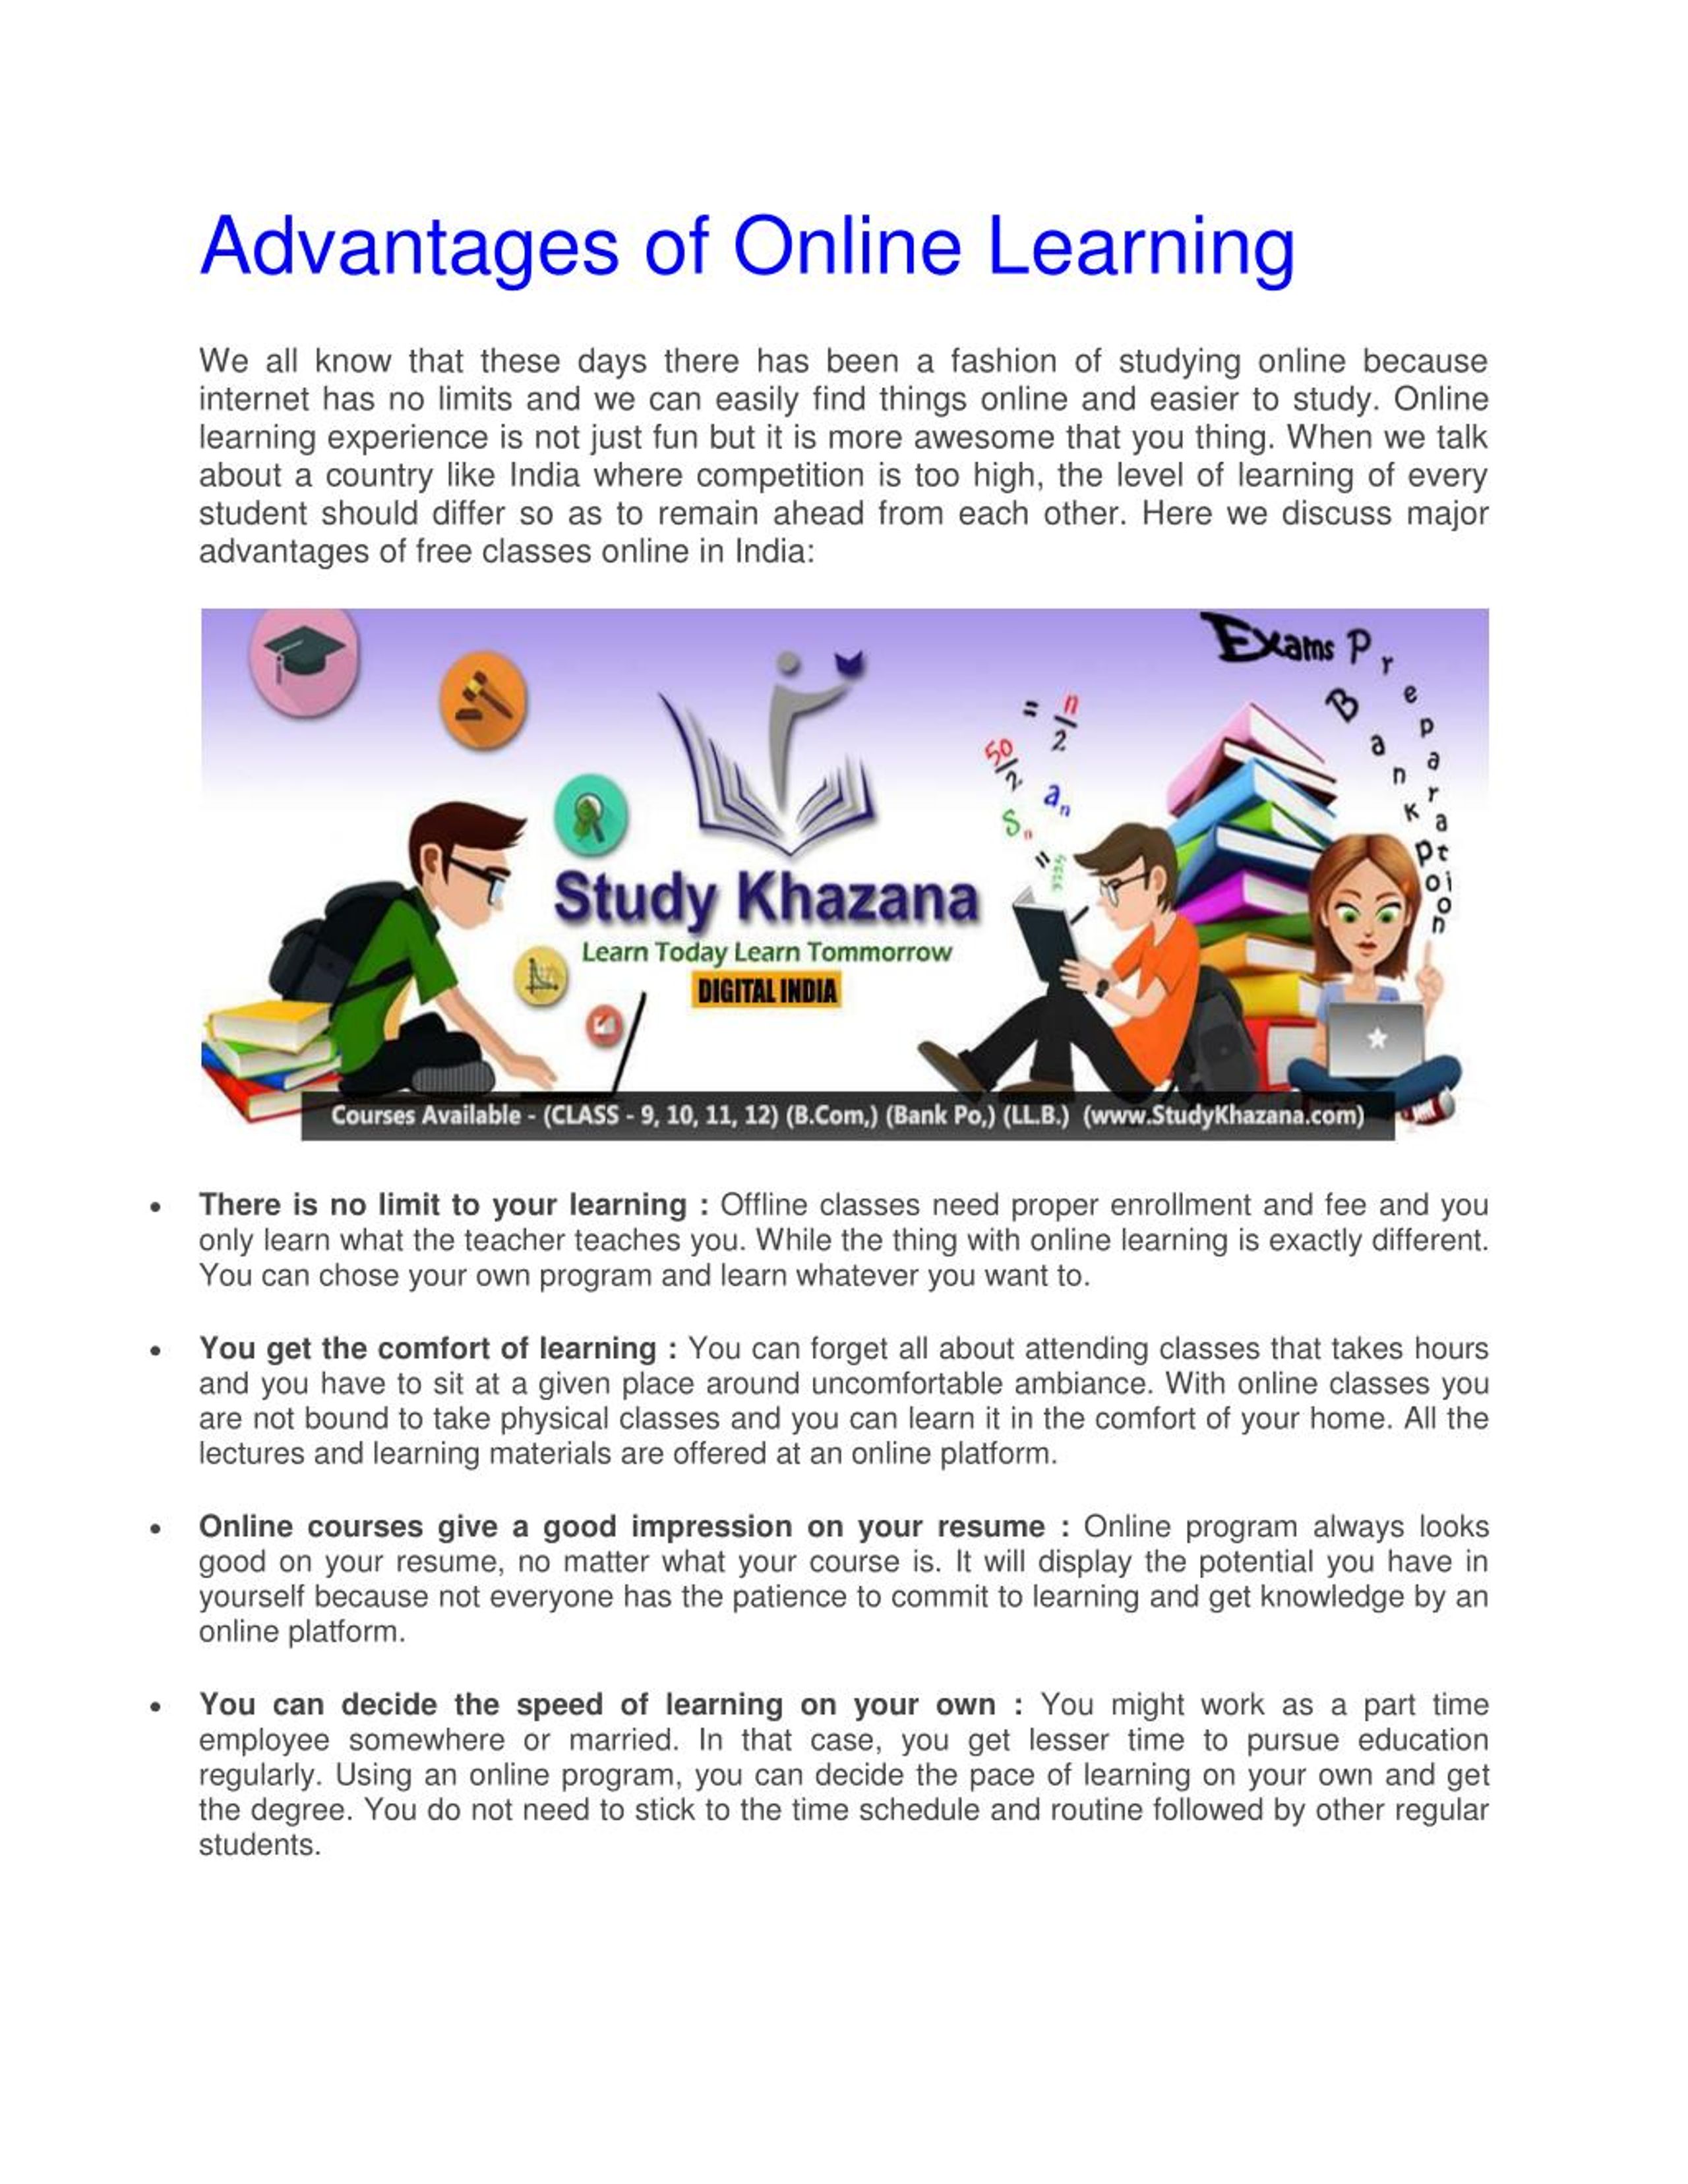 Ppt Advantages Of Online Learning Powerpoint Presentation Free Download Id 7567541